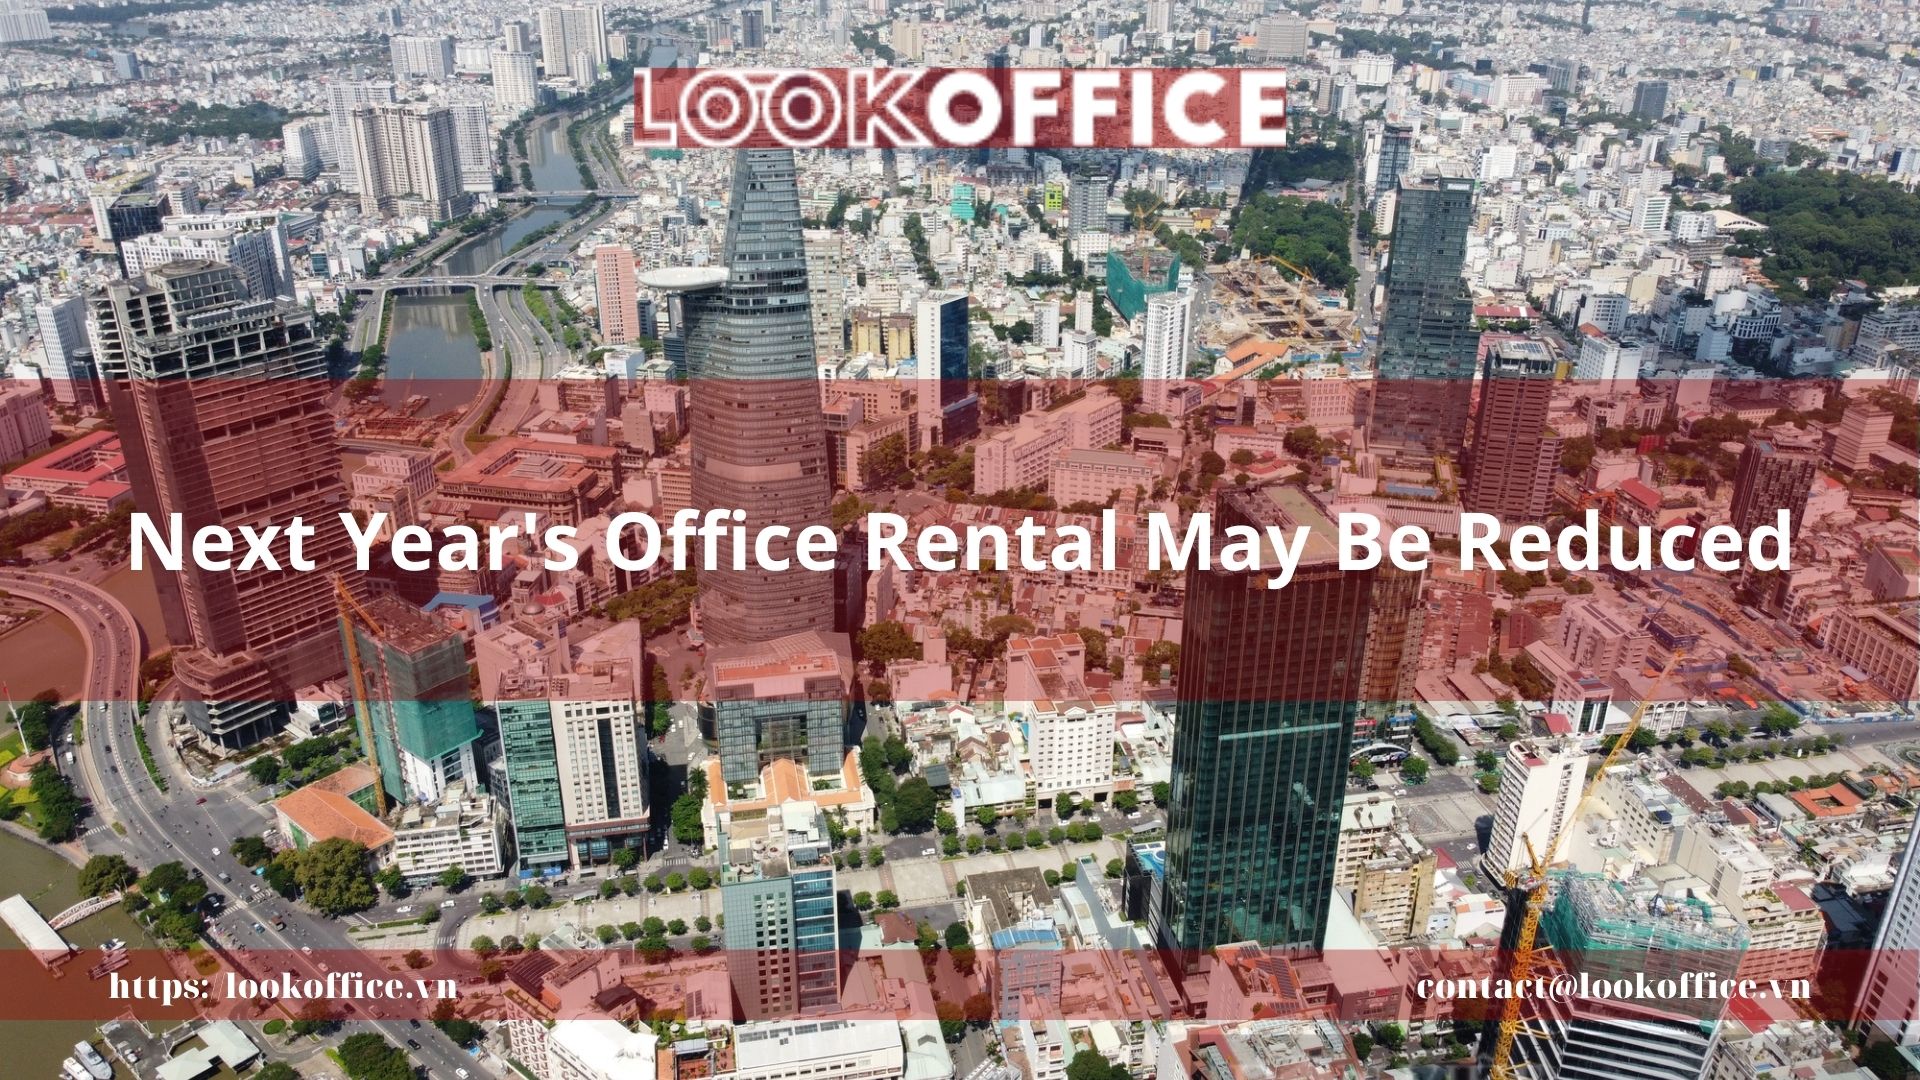 Next Year’s Office Rental May Be Reduced